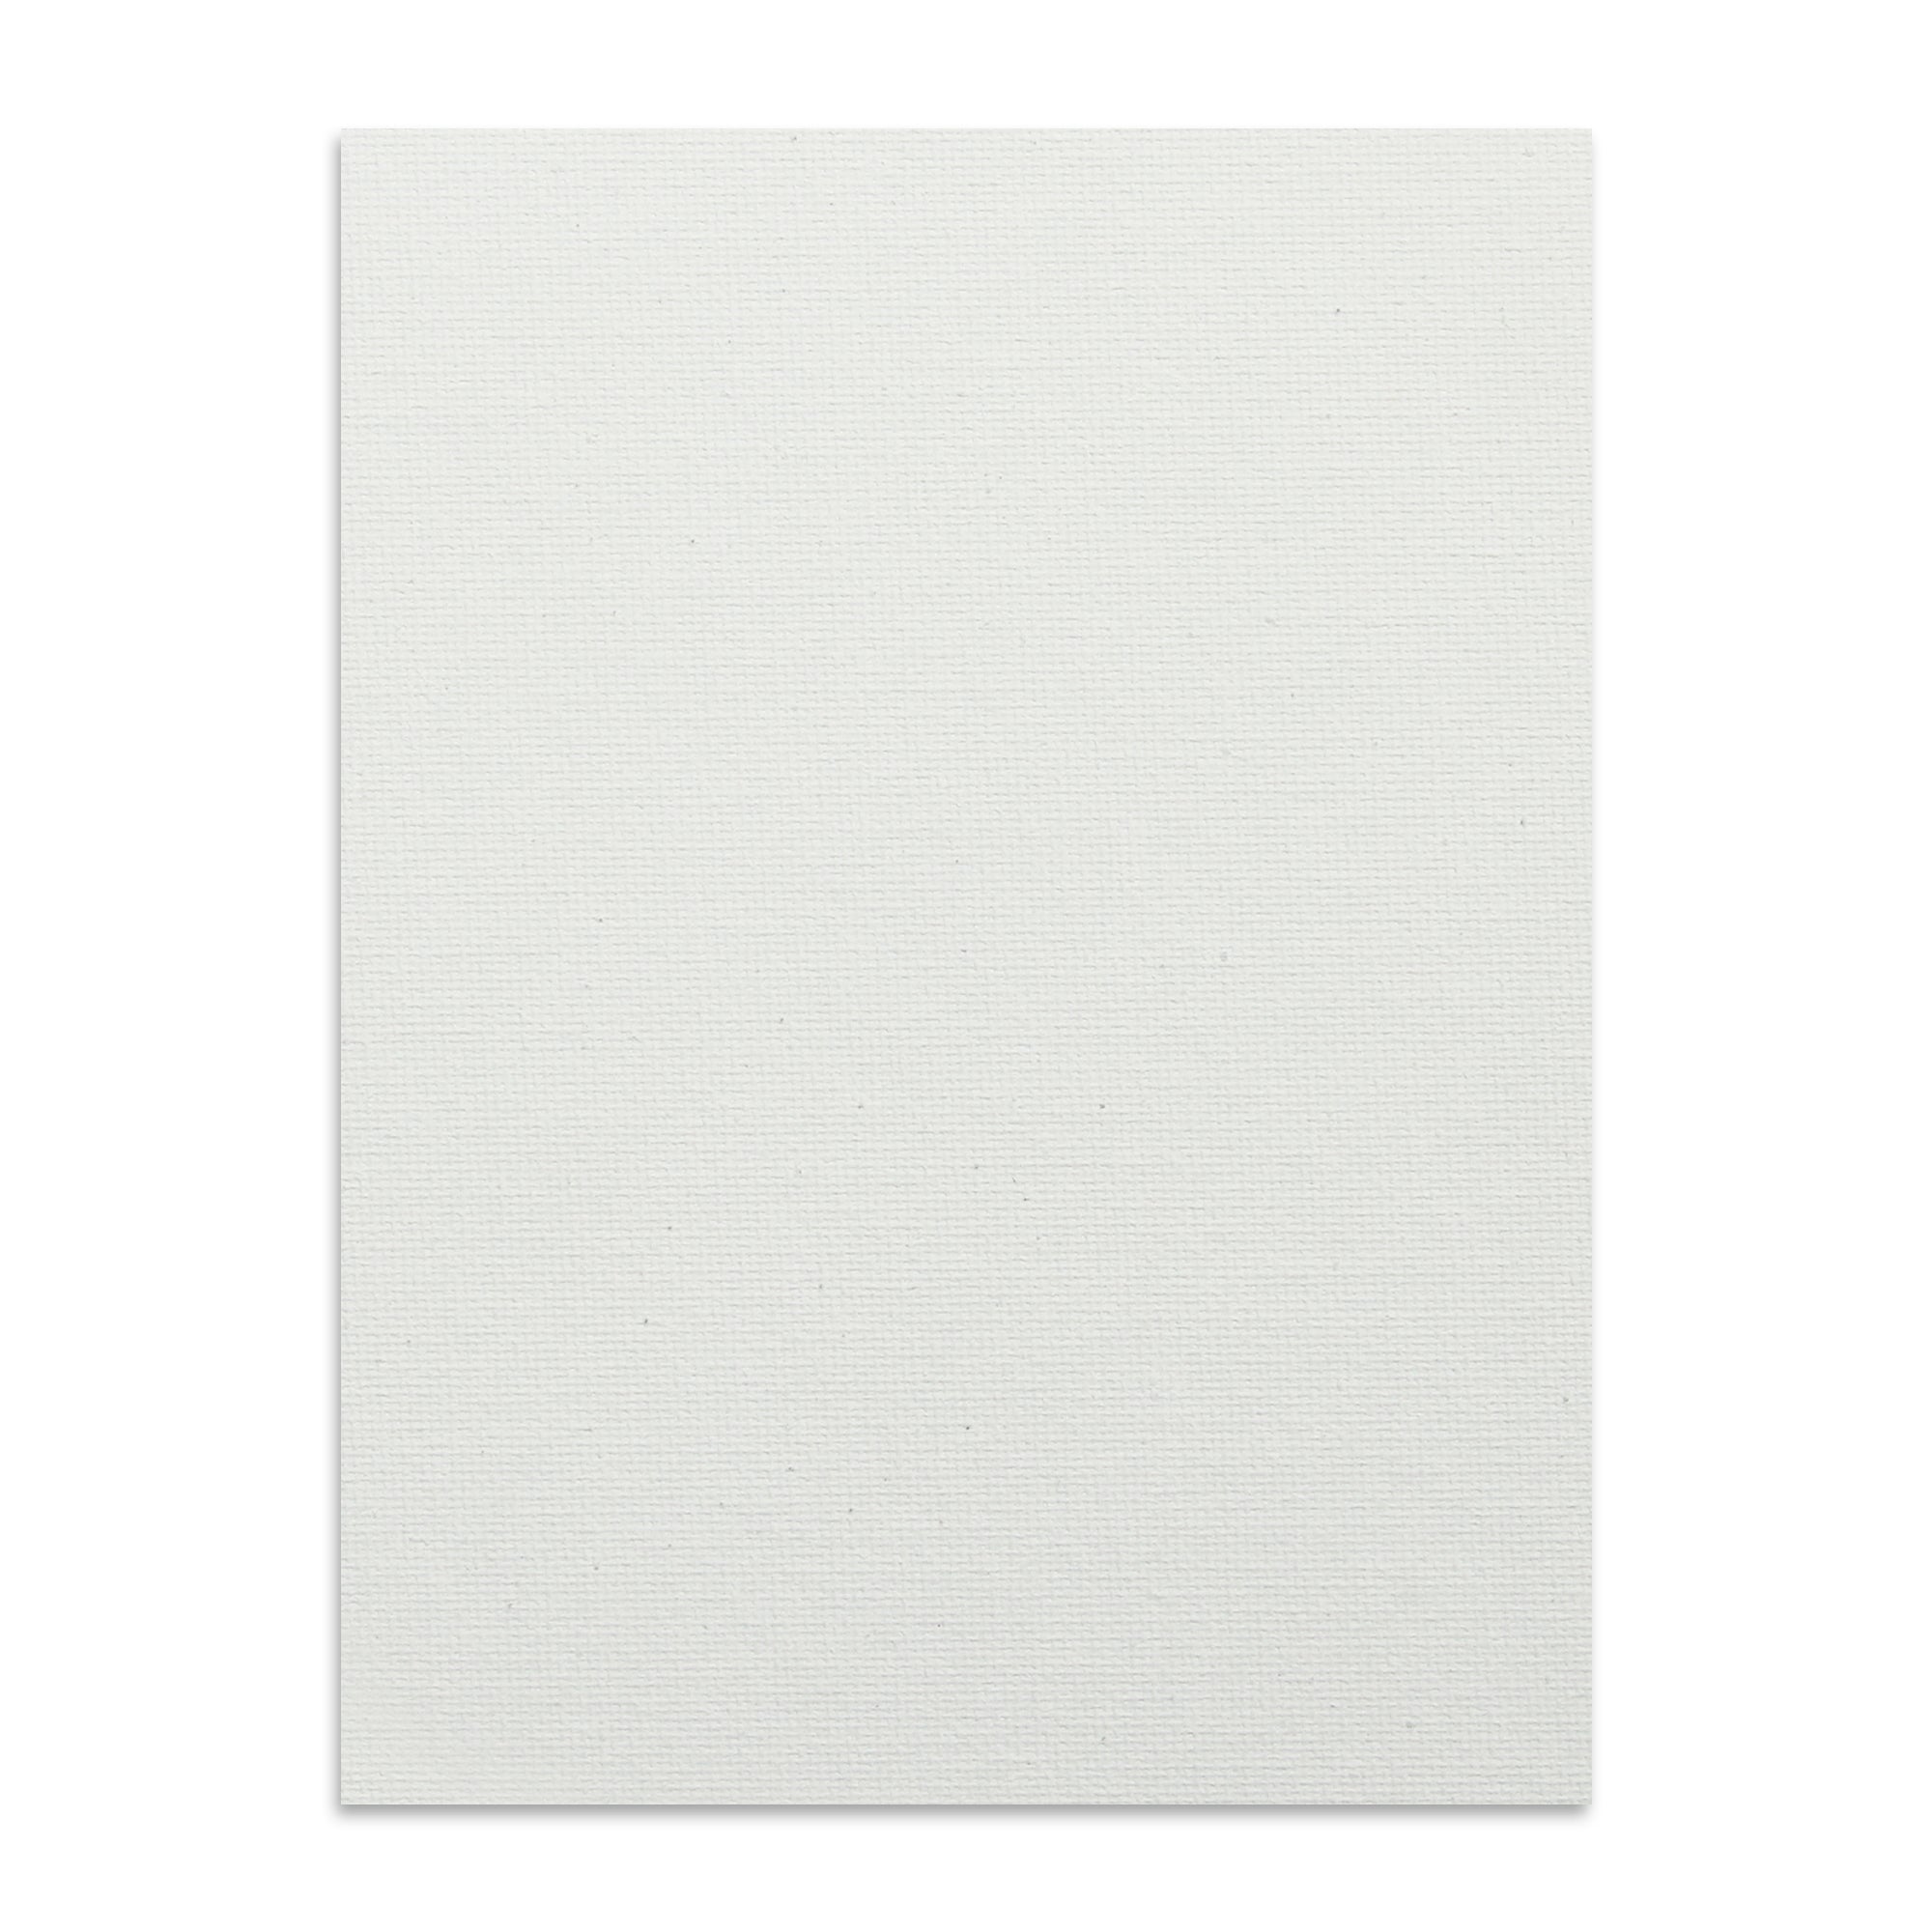 Canvas Board Rectangle 8 X 6Inch 230Gsm 2Mm Thick 4Pc Shrink Lb